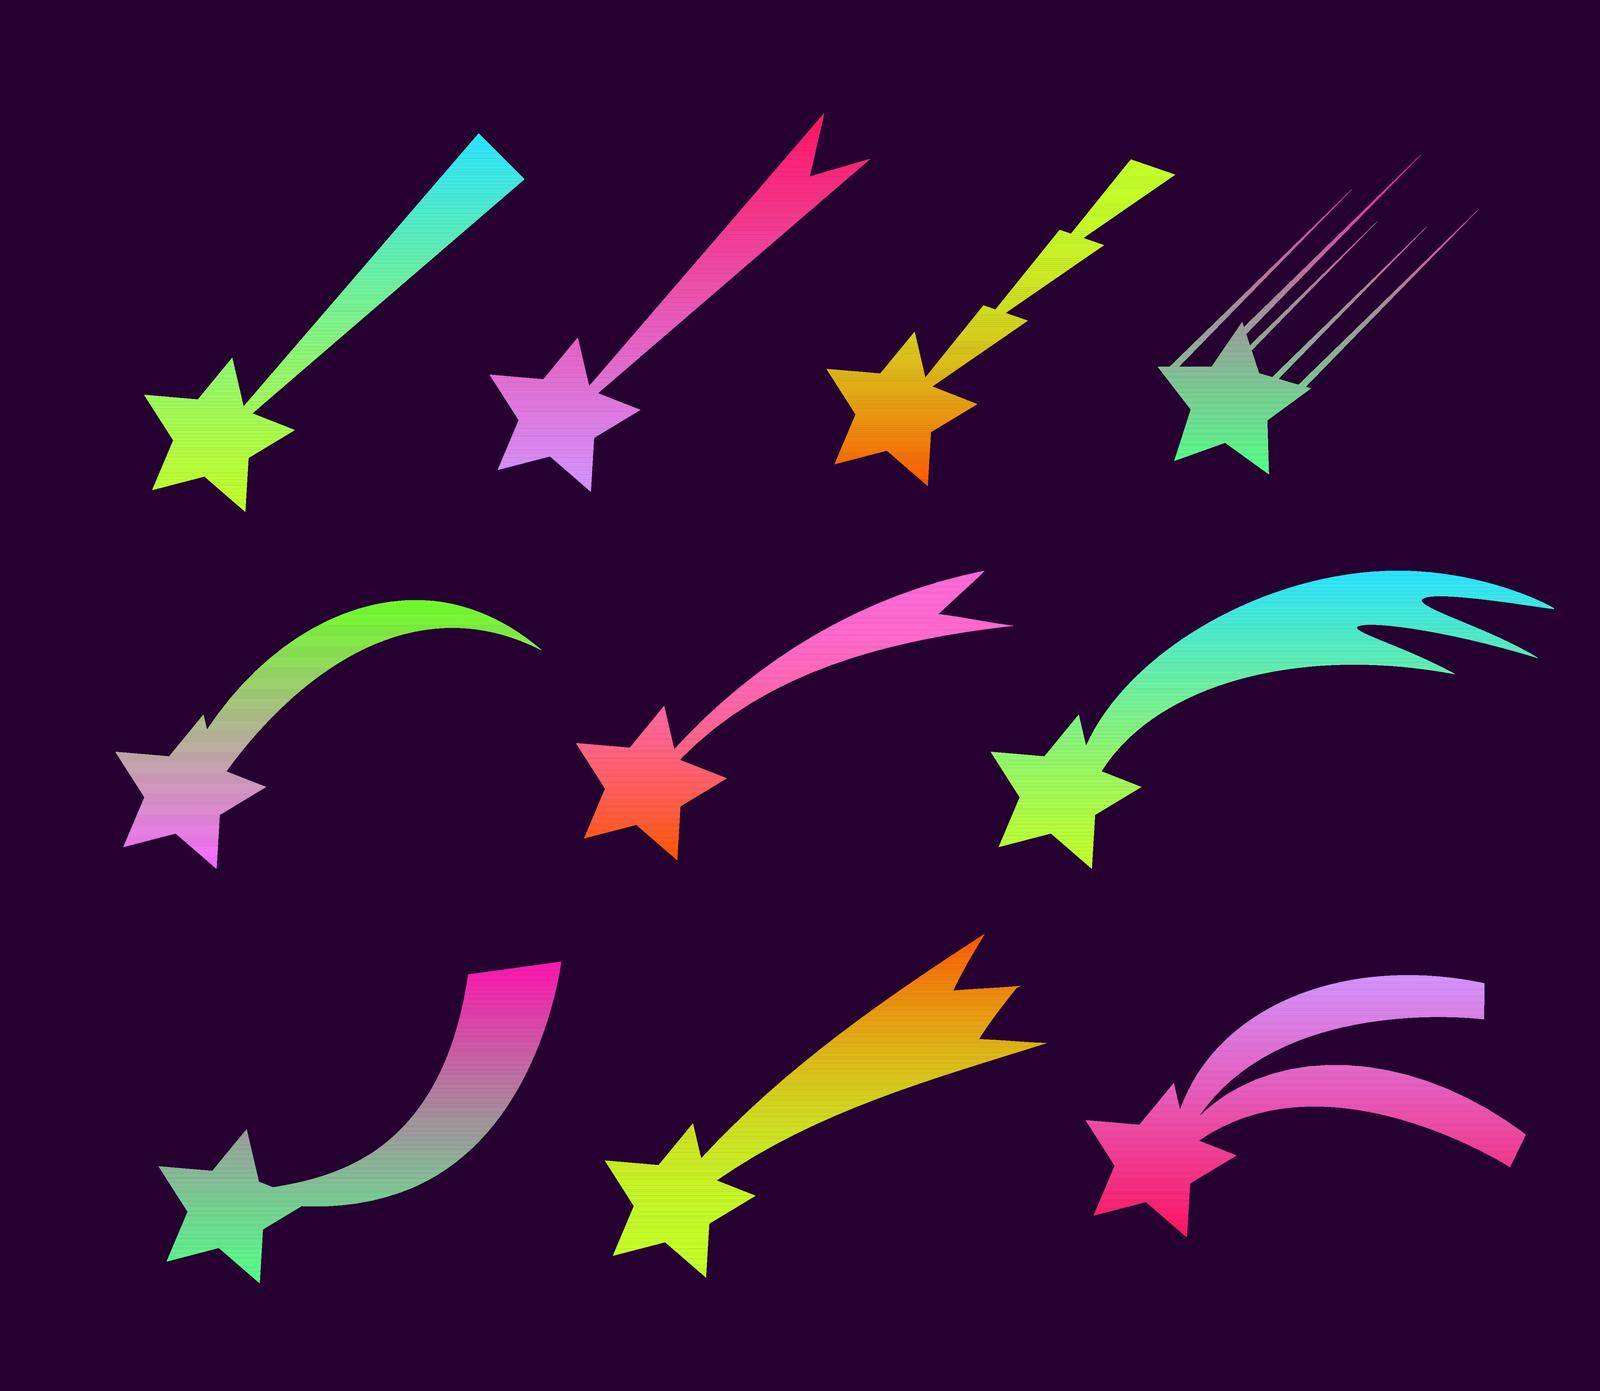 Set of neon space falling down comets and stars vector illustration. Meteors fire trails isolated. Fireball and star glowing gas and dust tails at galaxy